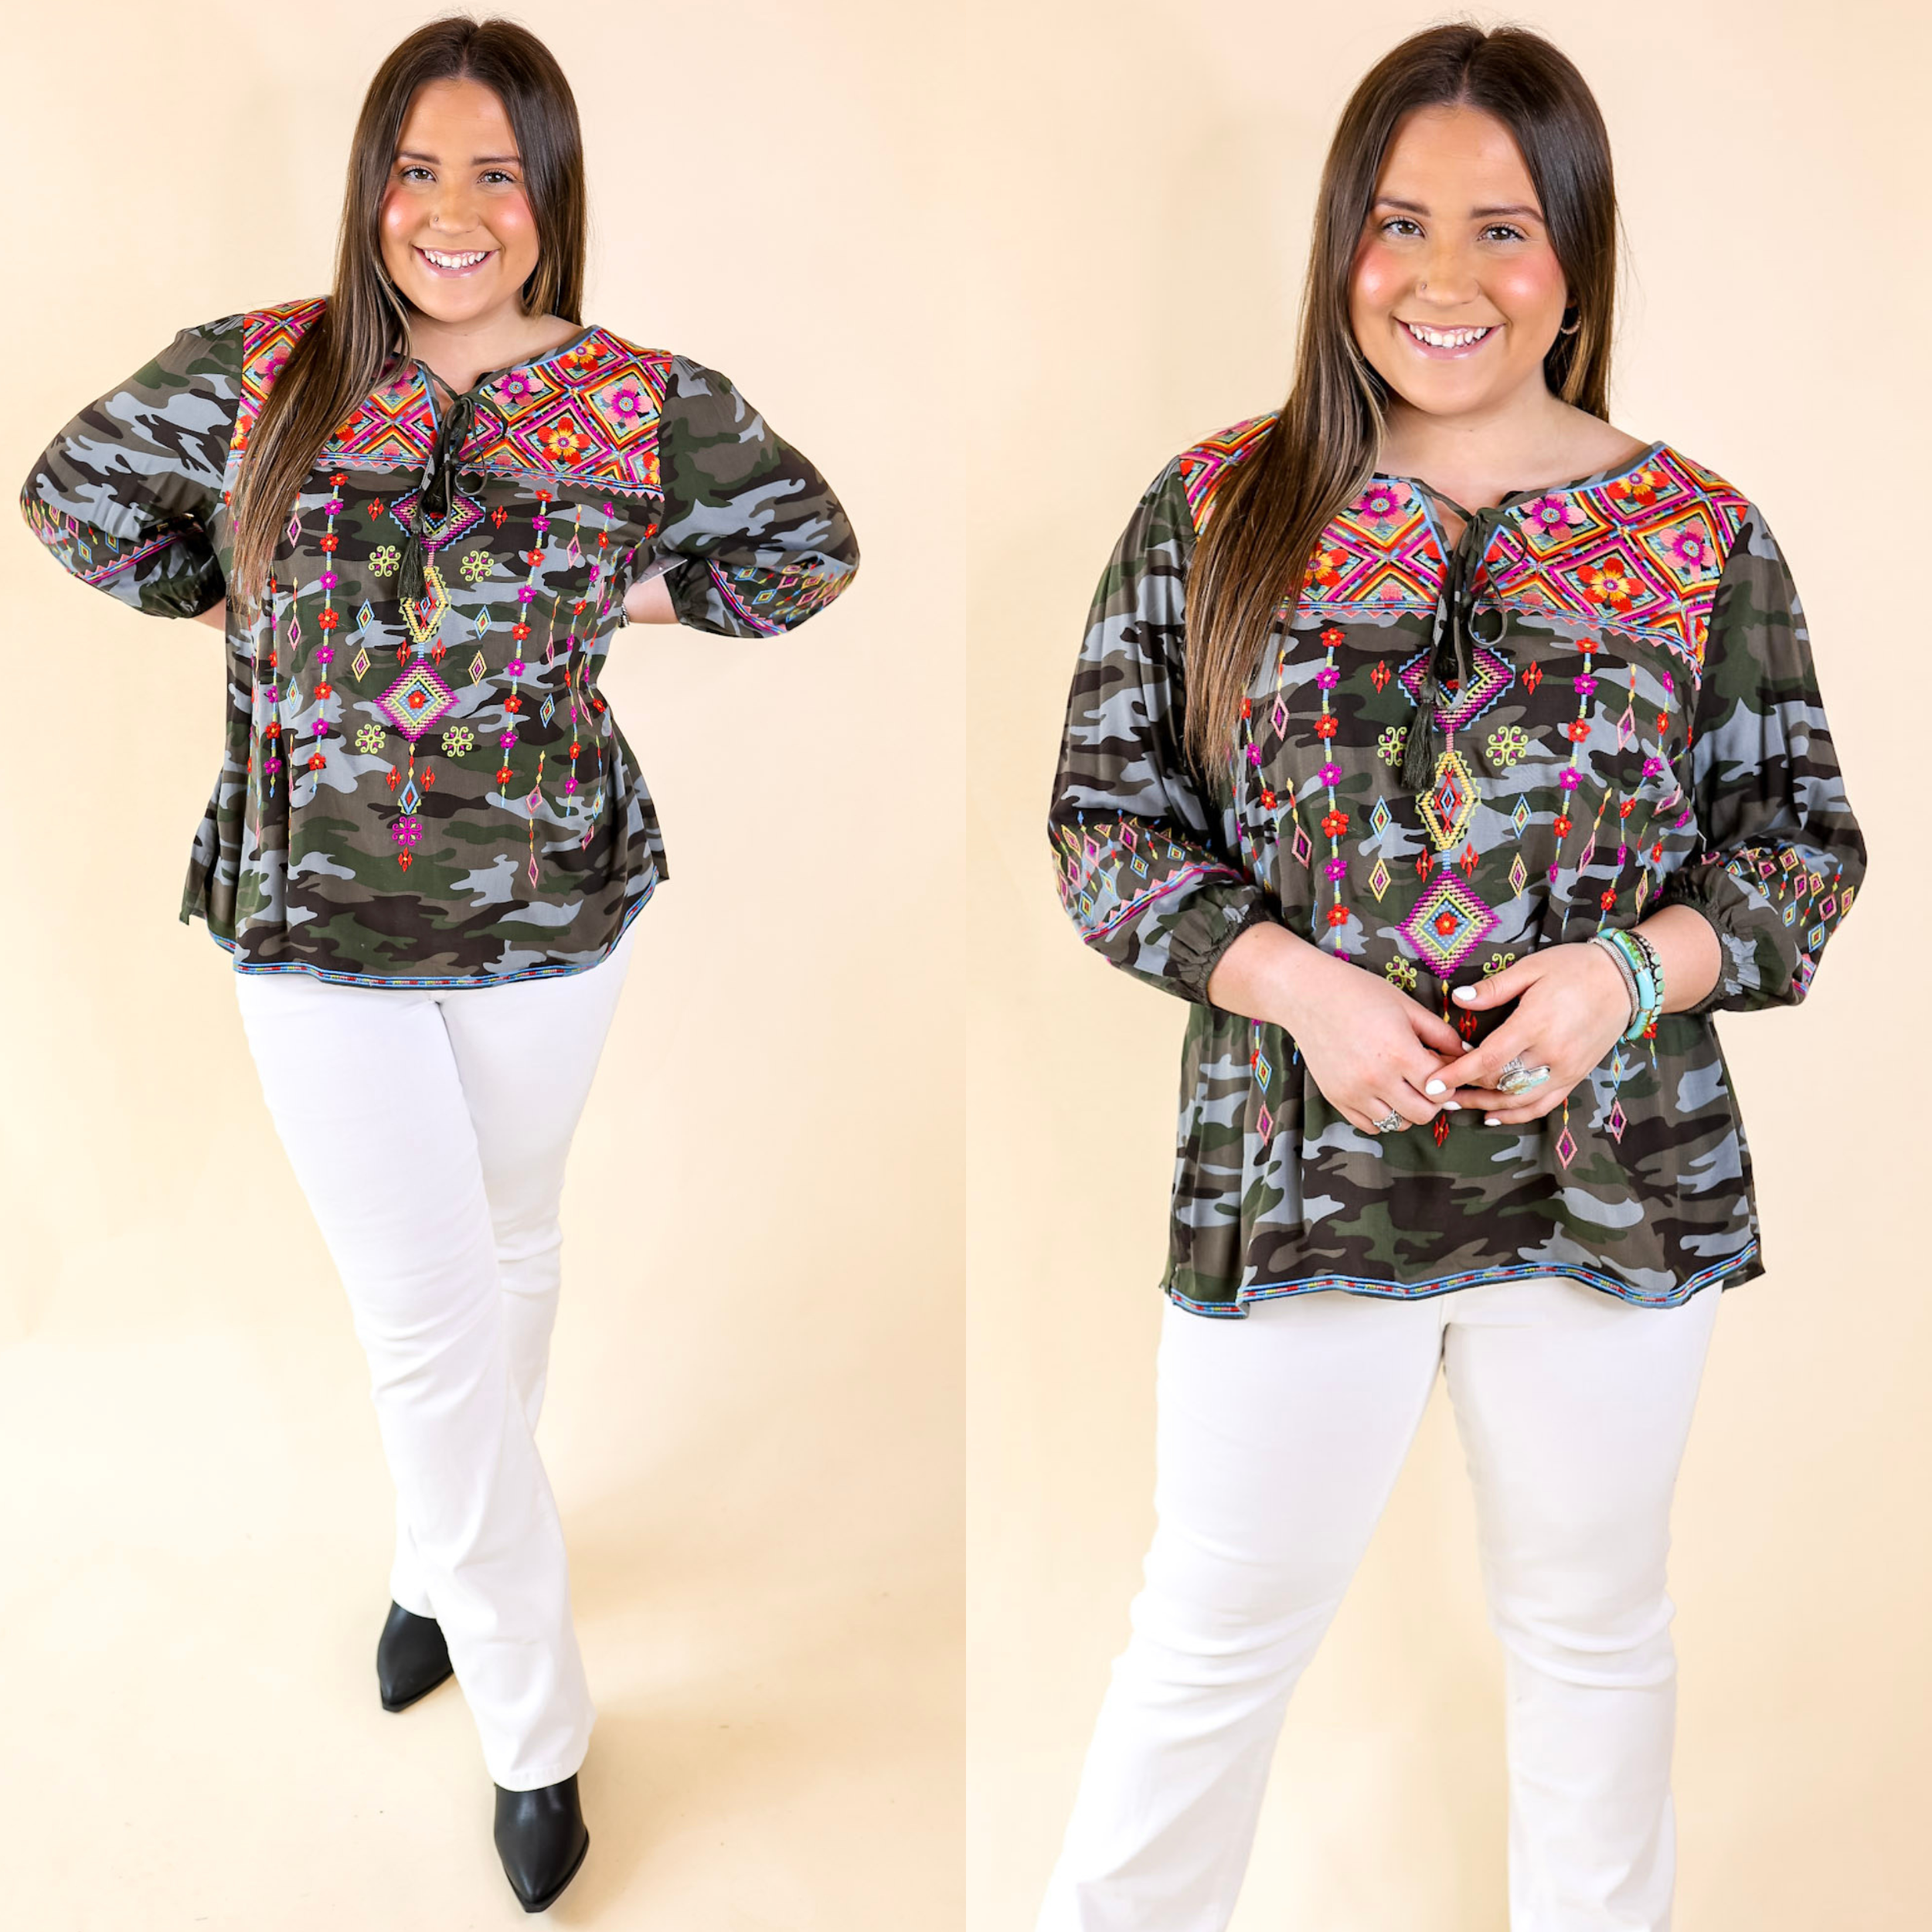 Last Chance Size Small & Med. | Nature Walk 3/4 Sleeve Embroidered Keyhole Top in Camouflage - Giddy Up Glamour Boutique